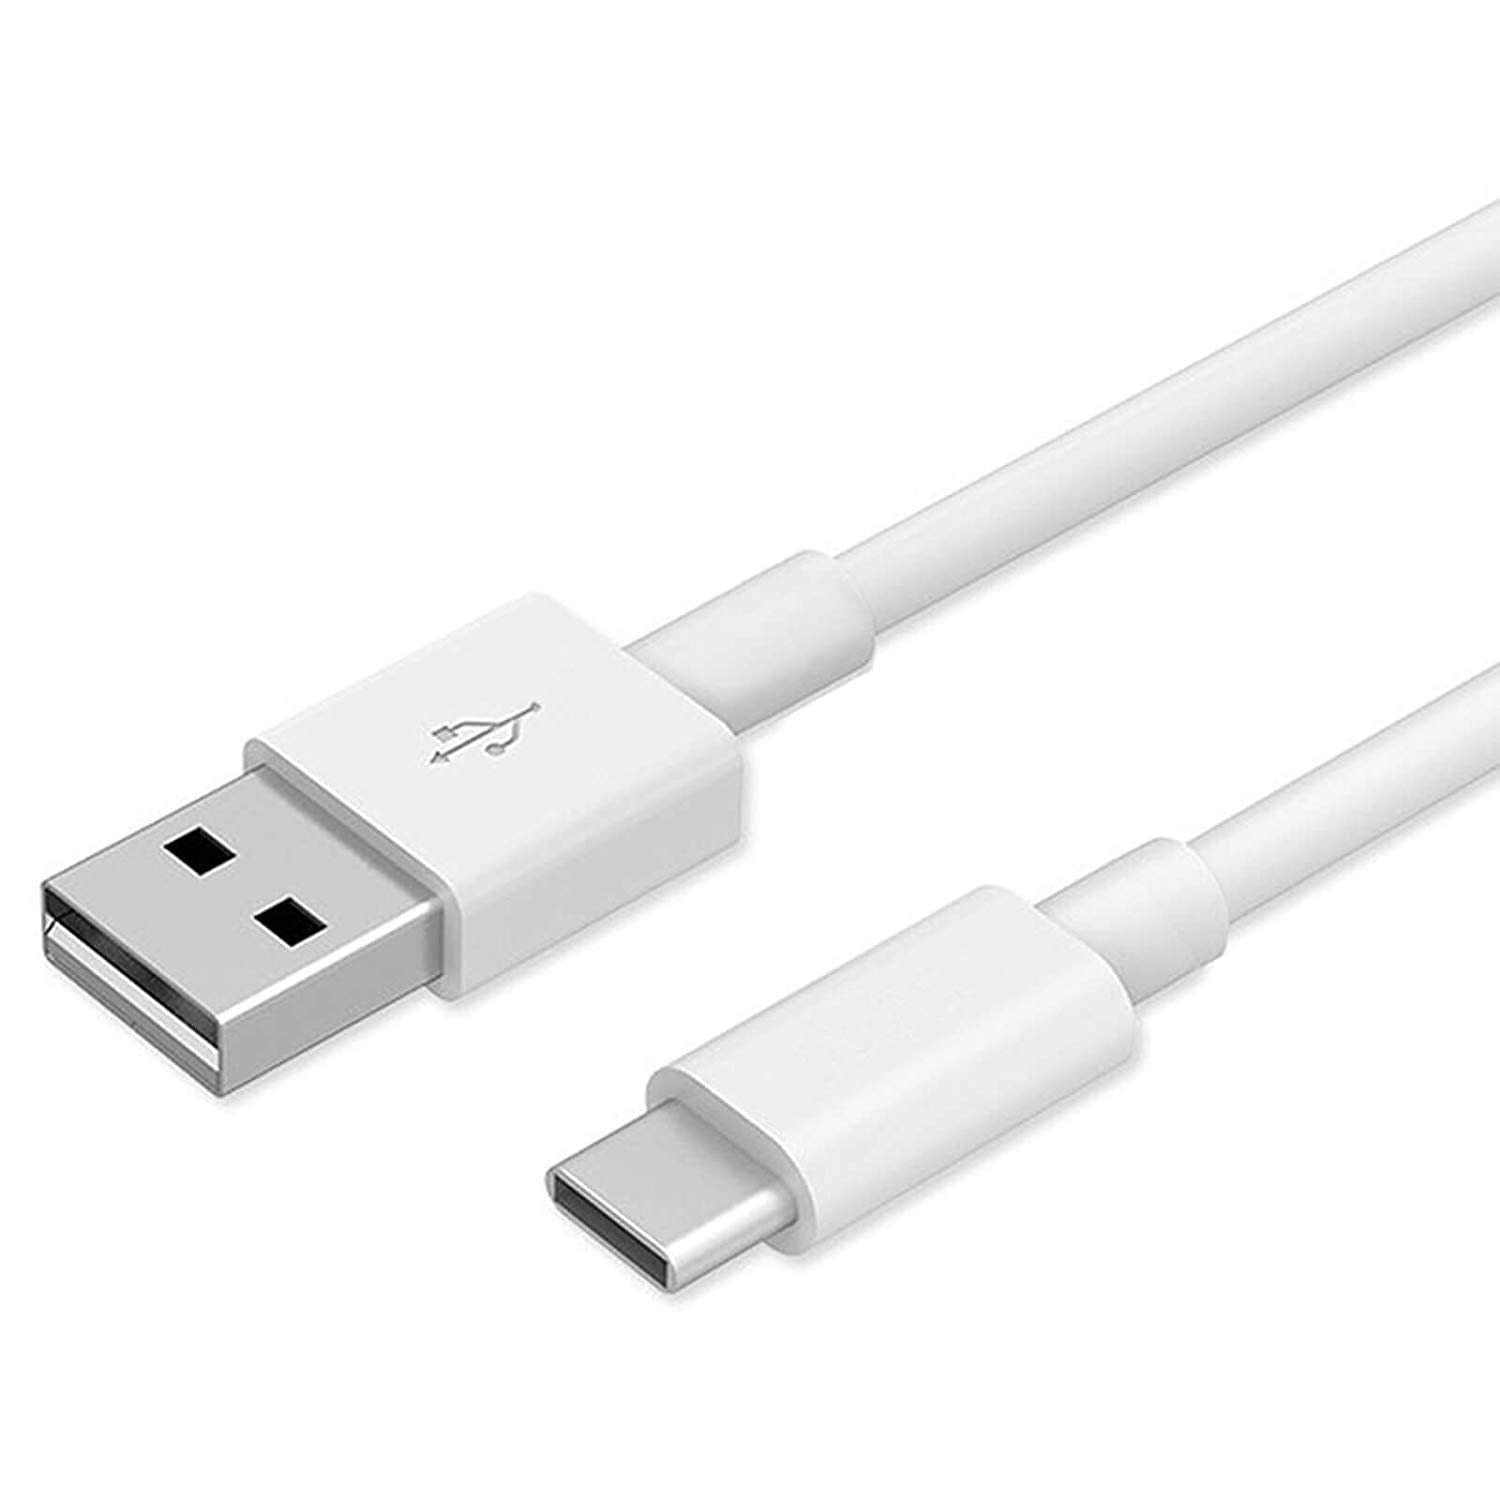 Samsung Galaxy A21s USB to Type C Charging Cable Lead White - 2M - SmartPhoneGadgetUK